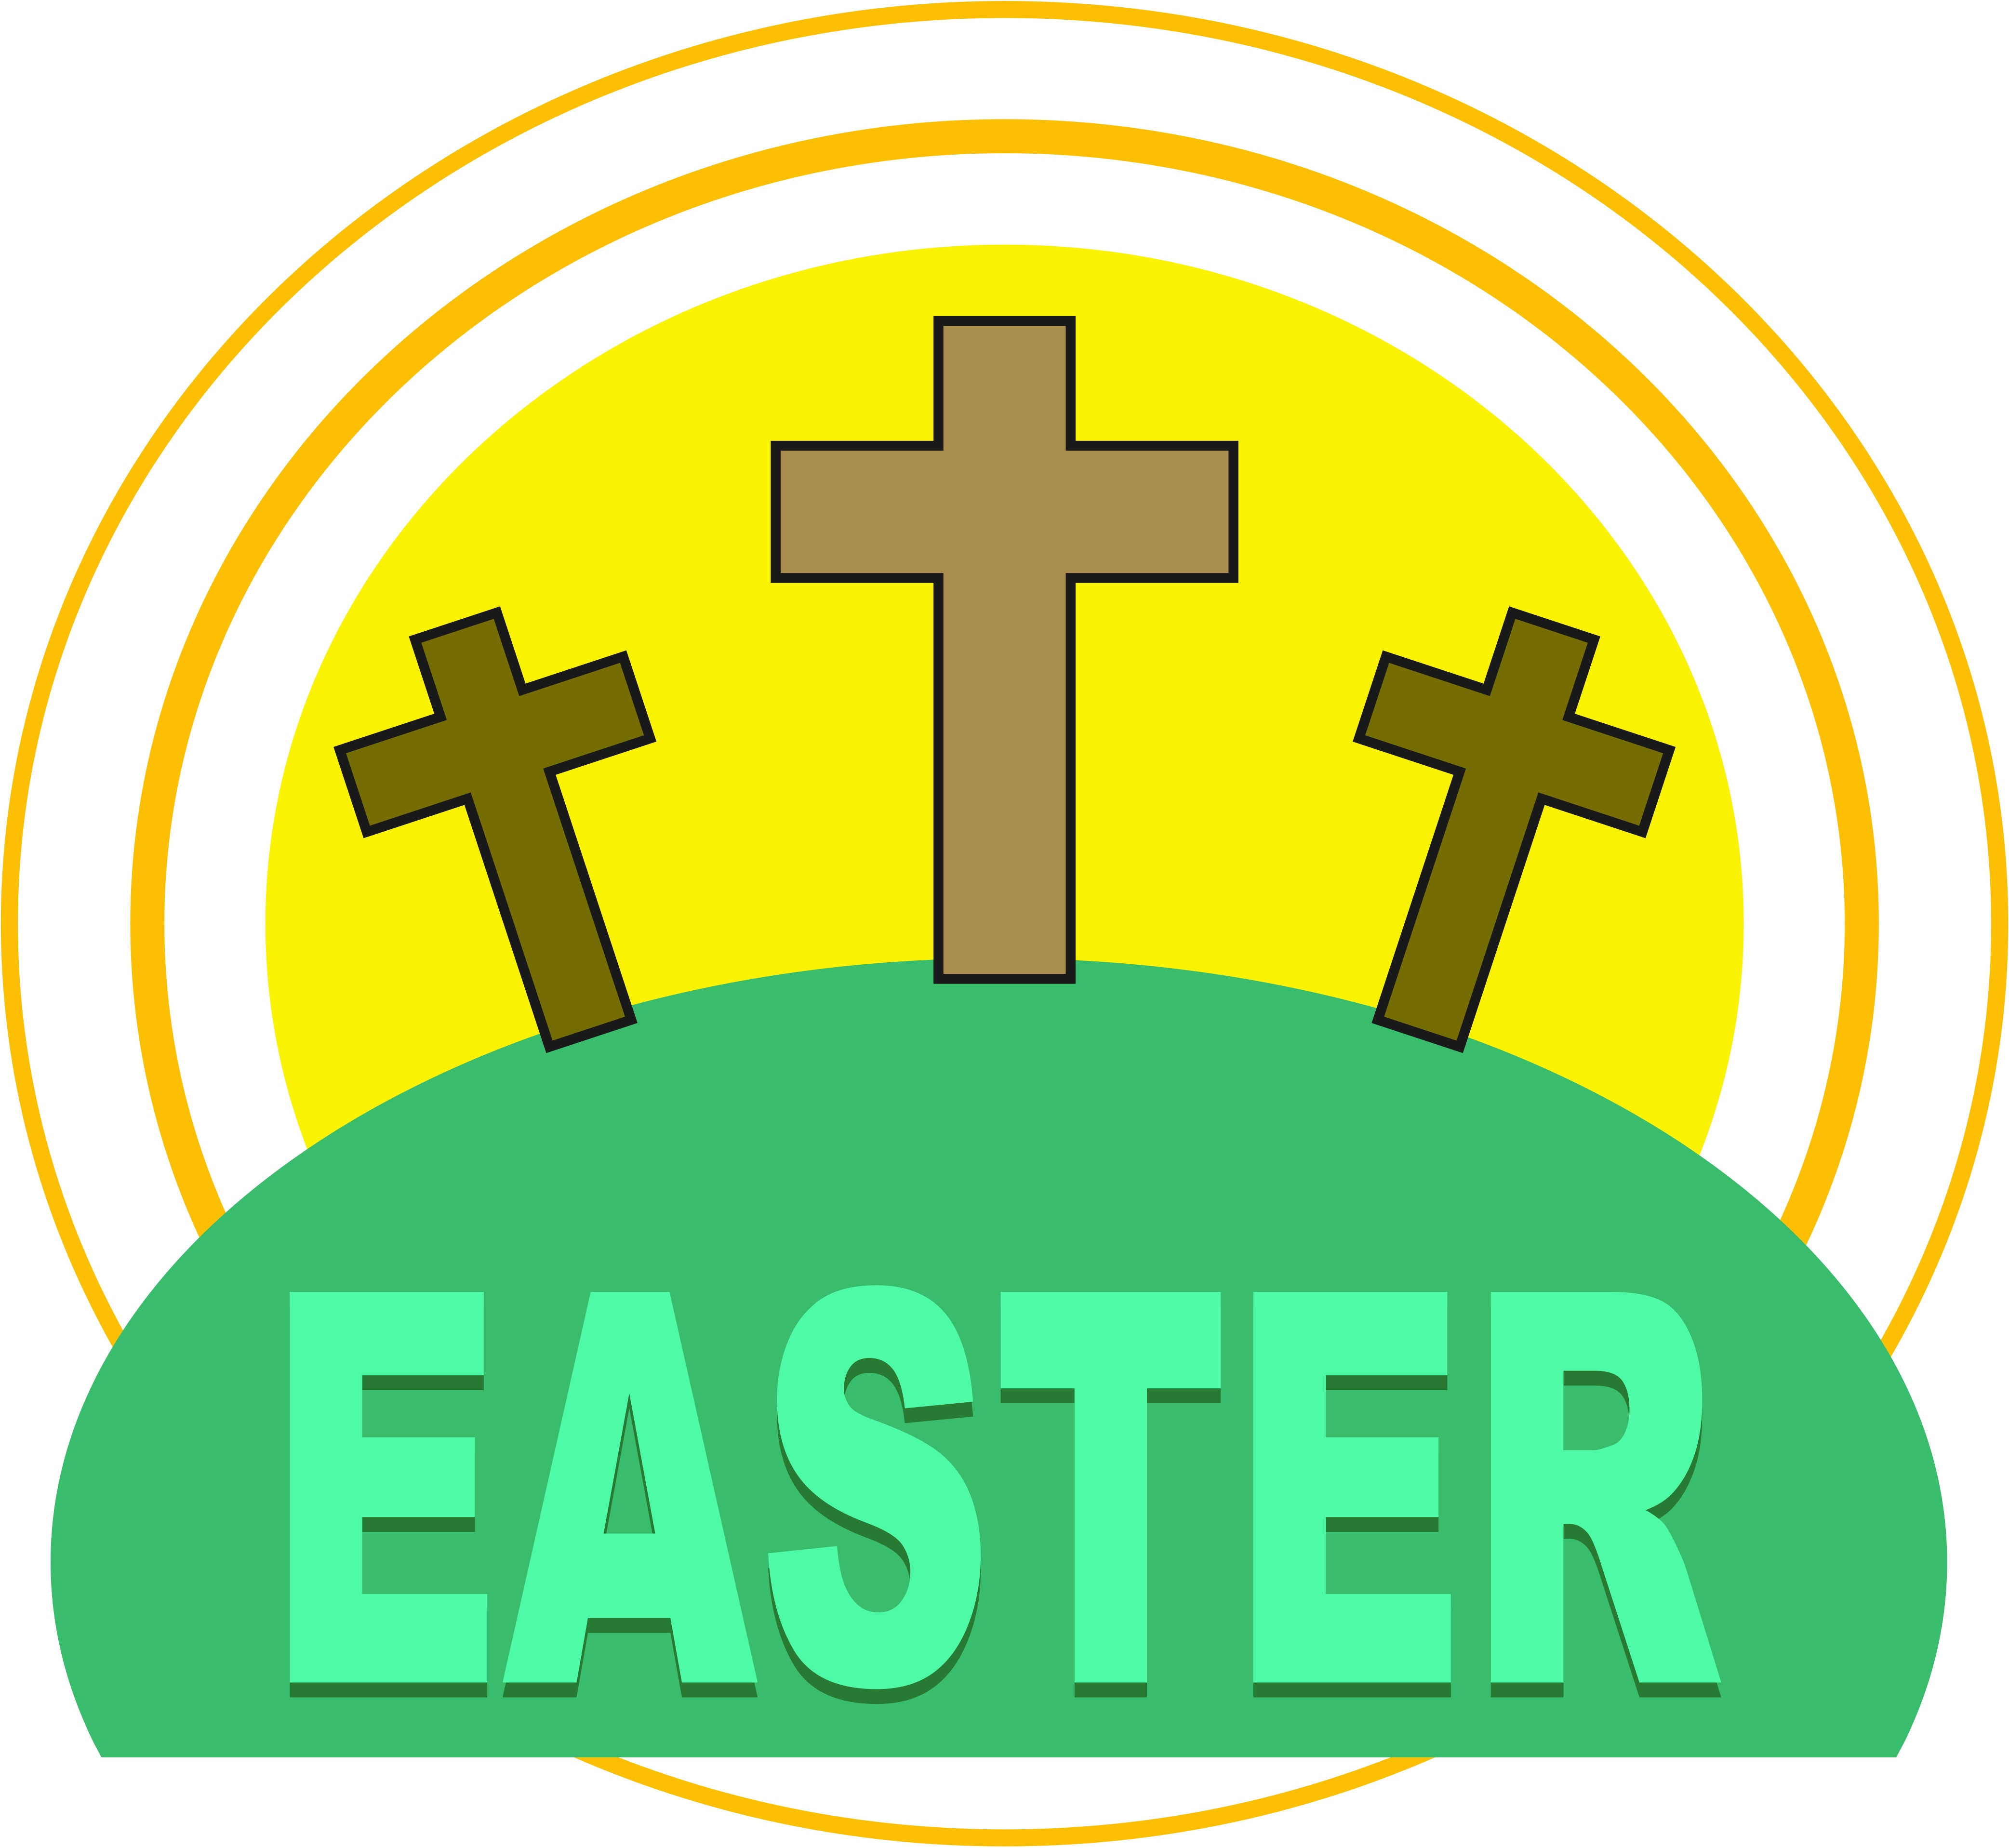 Easter Calvary Free Images At Clker Com Vector Clip Art Online